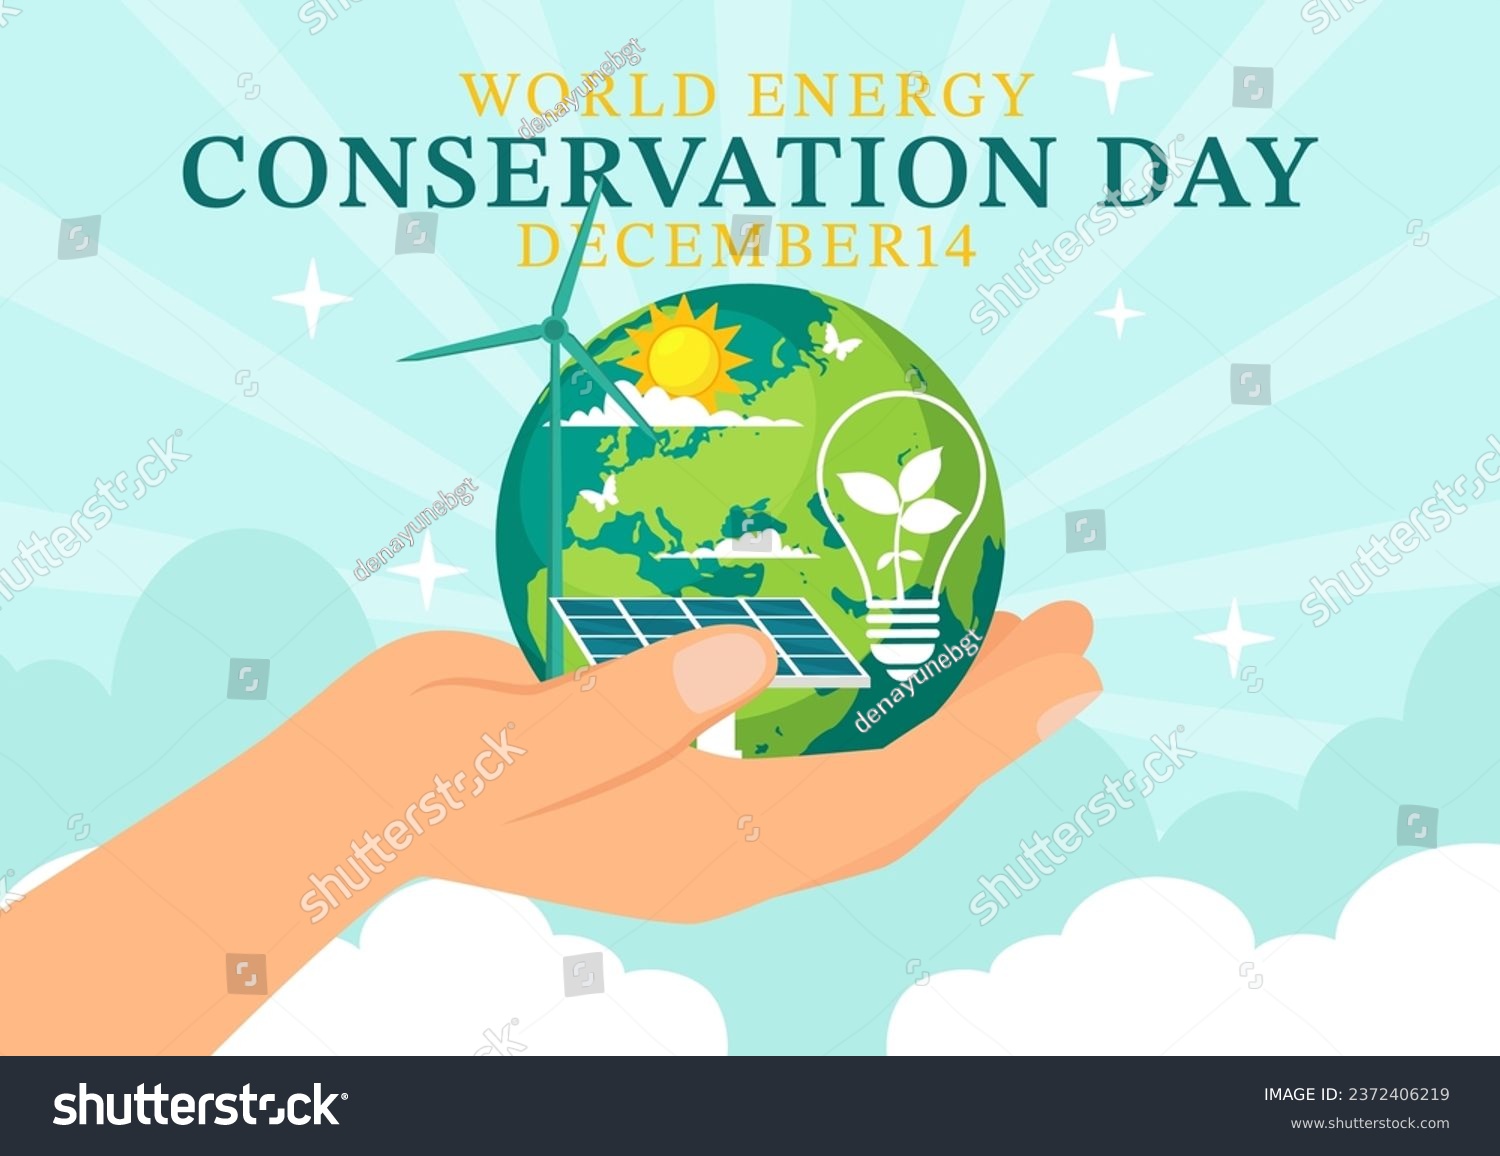 National Energy Conservation Day Vector Illustration on 14 December for Save the Planet and Green Eco Friendly with Lamp and Earth Background Design #2372406219